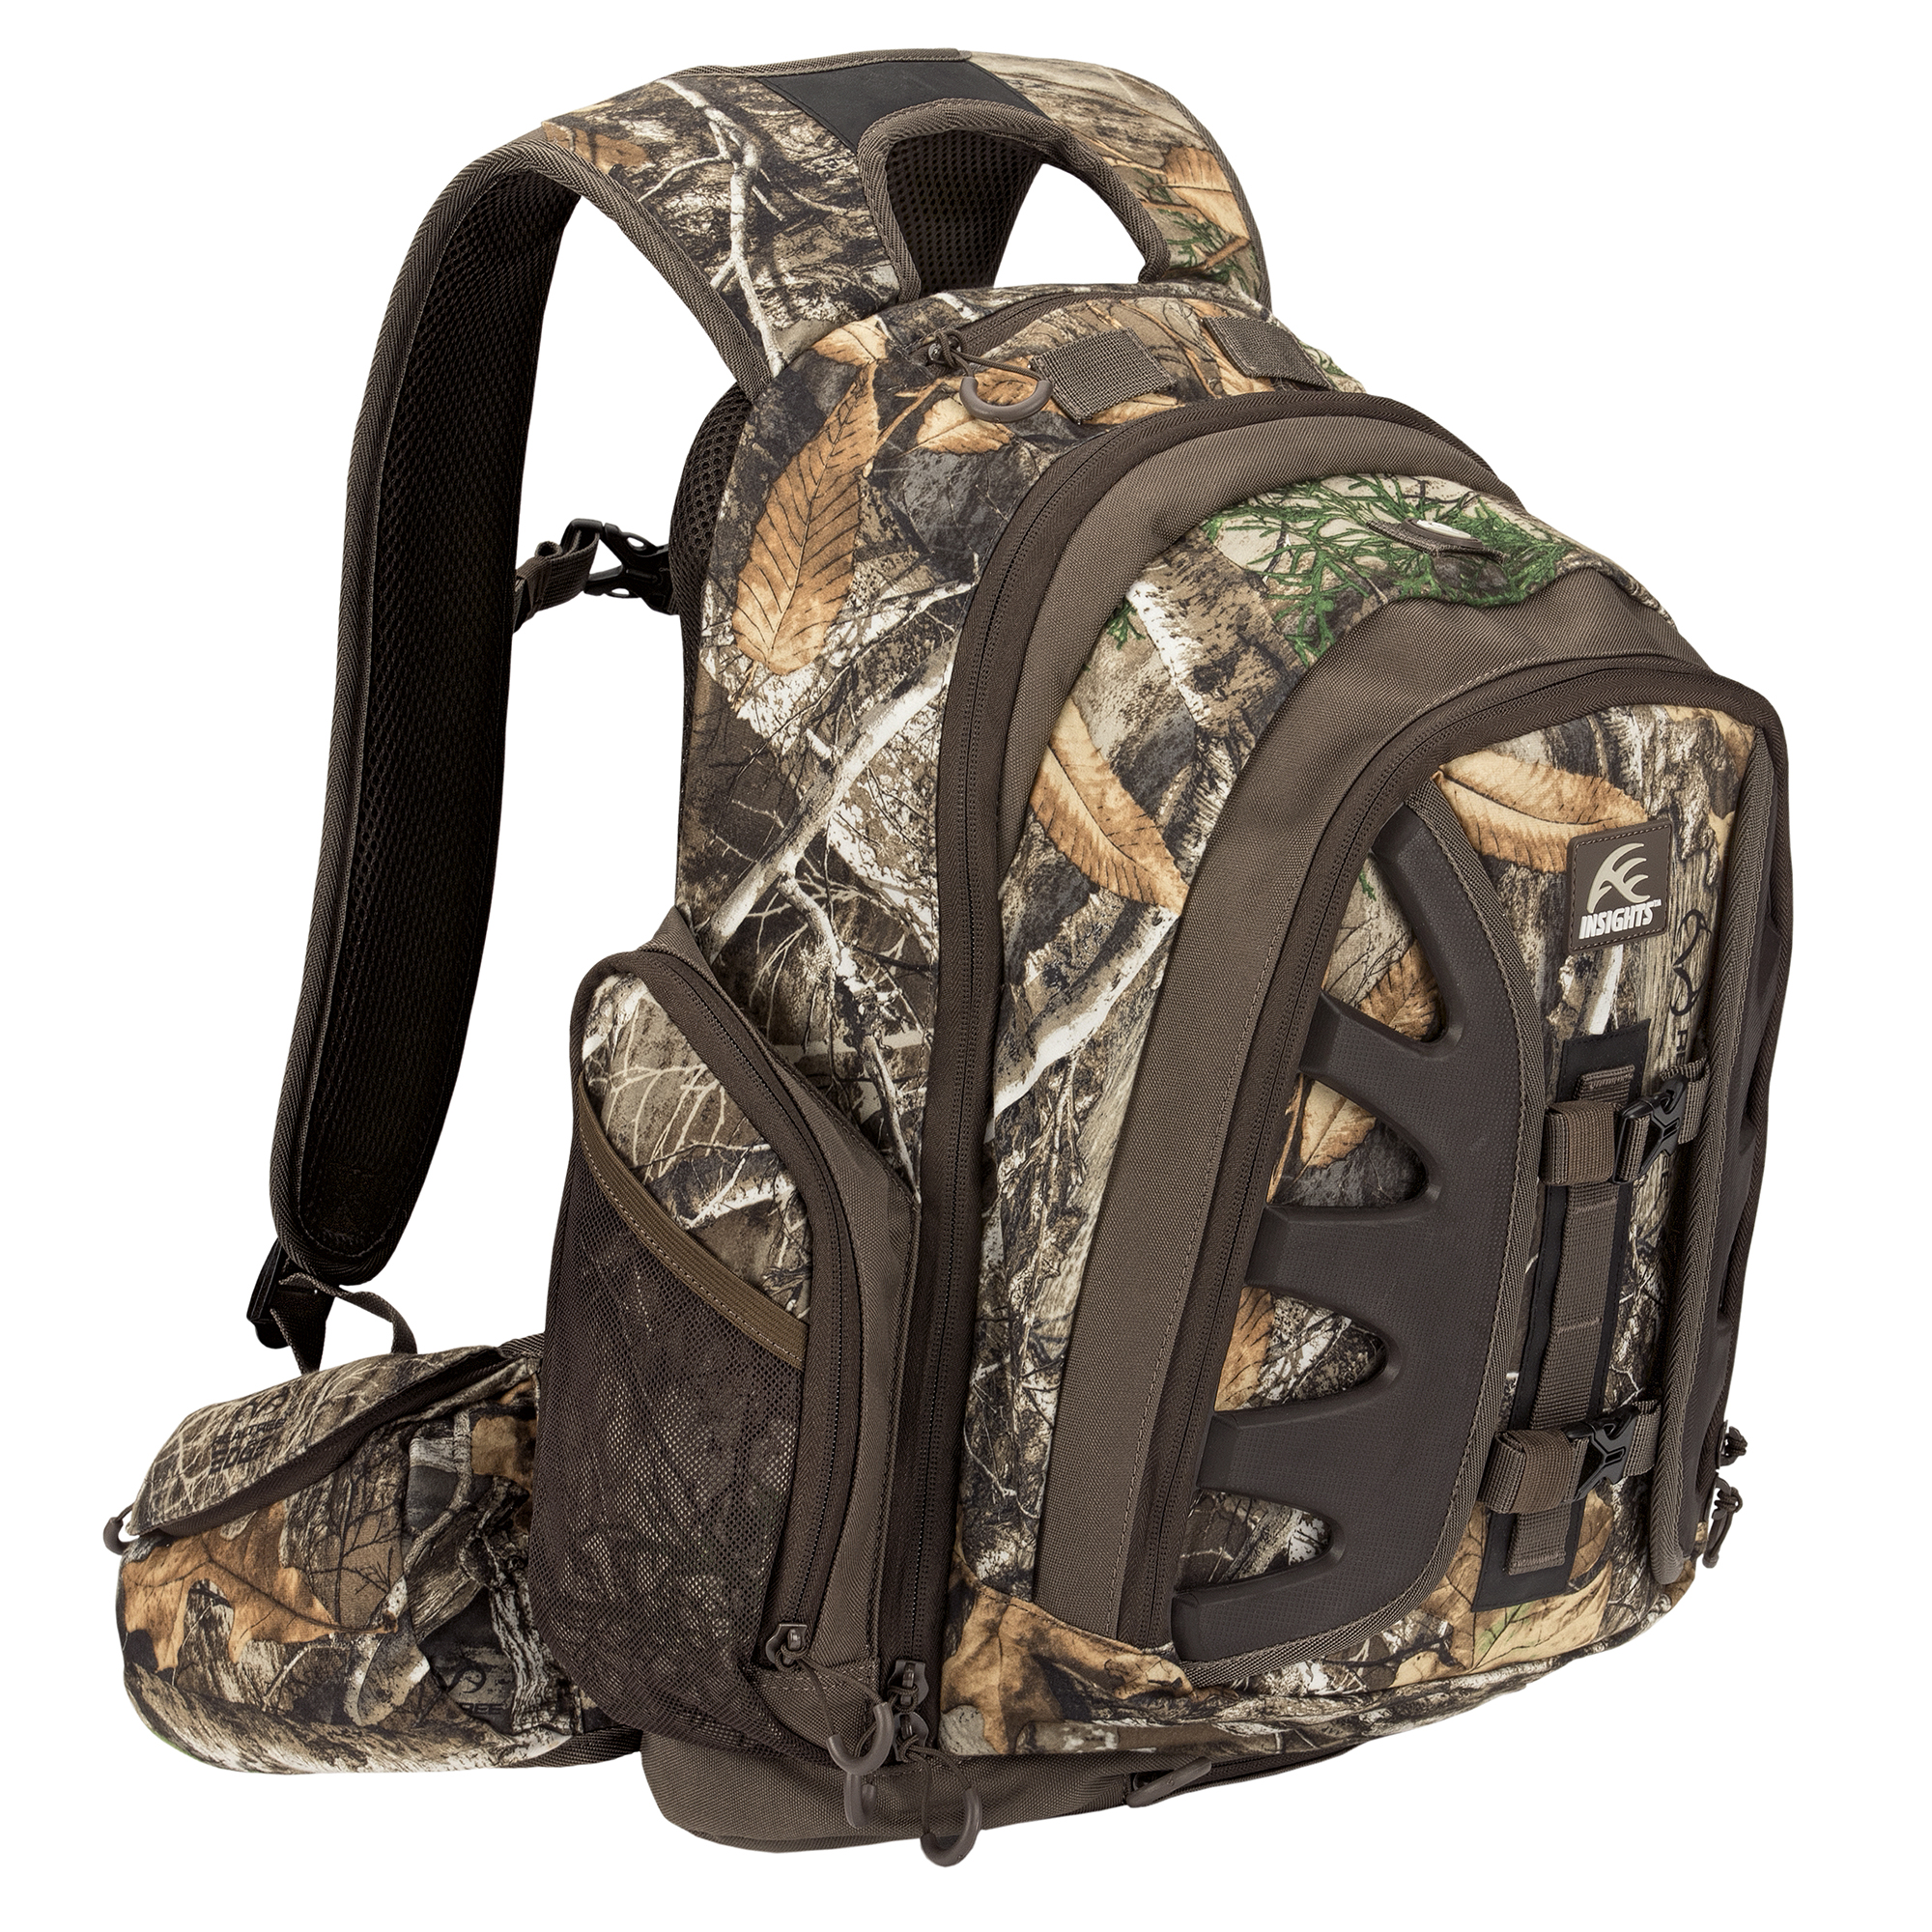 Insights 9301 The Element Outdoor Hiking Hunting Backpack, Realtree Edge Camo - image 3 of 9